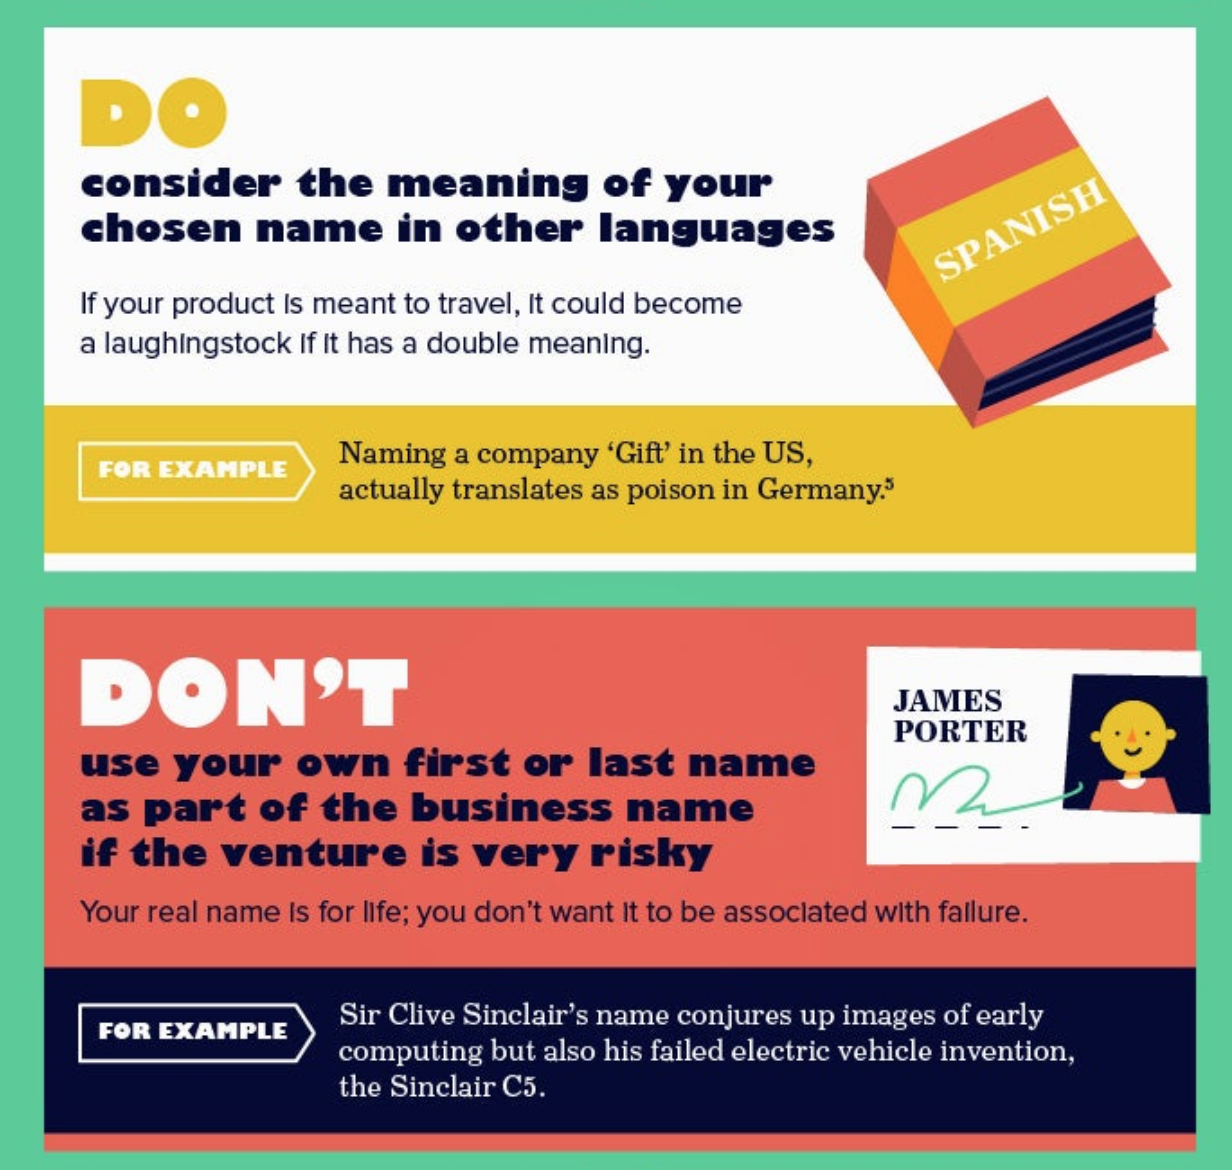 Consider the name in other languages.Don't use your first or last name.